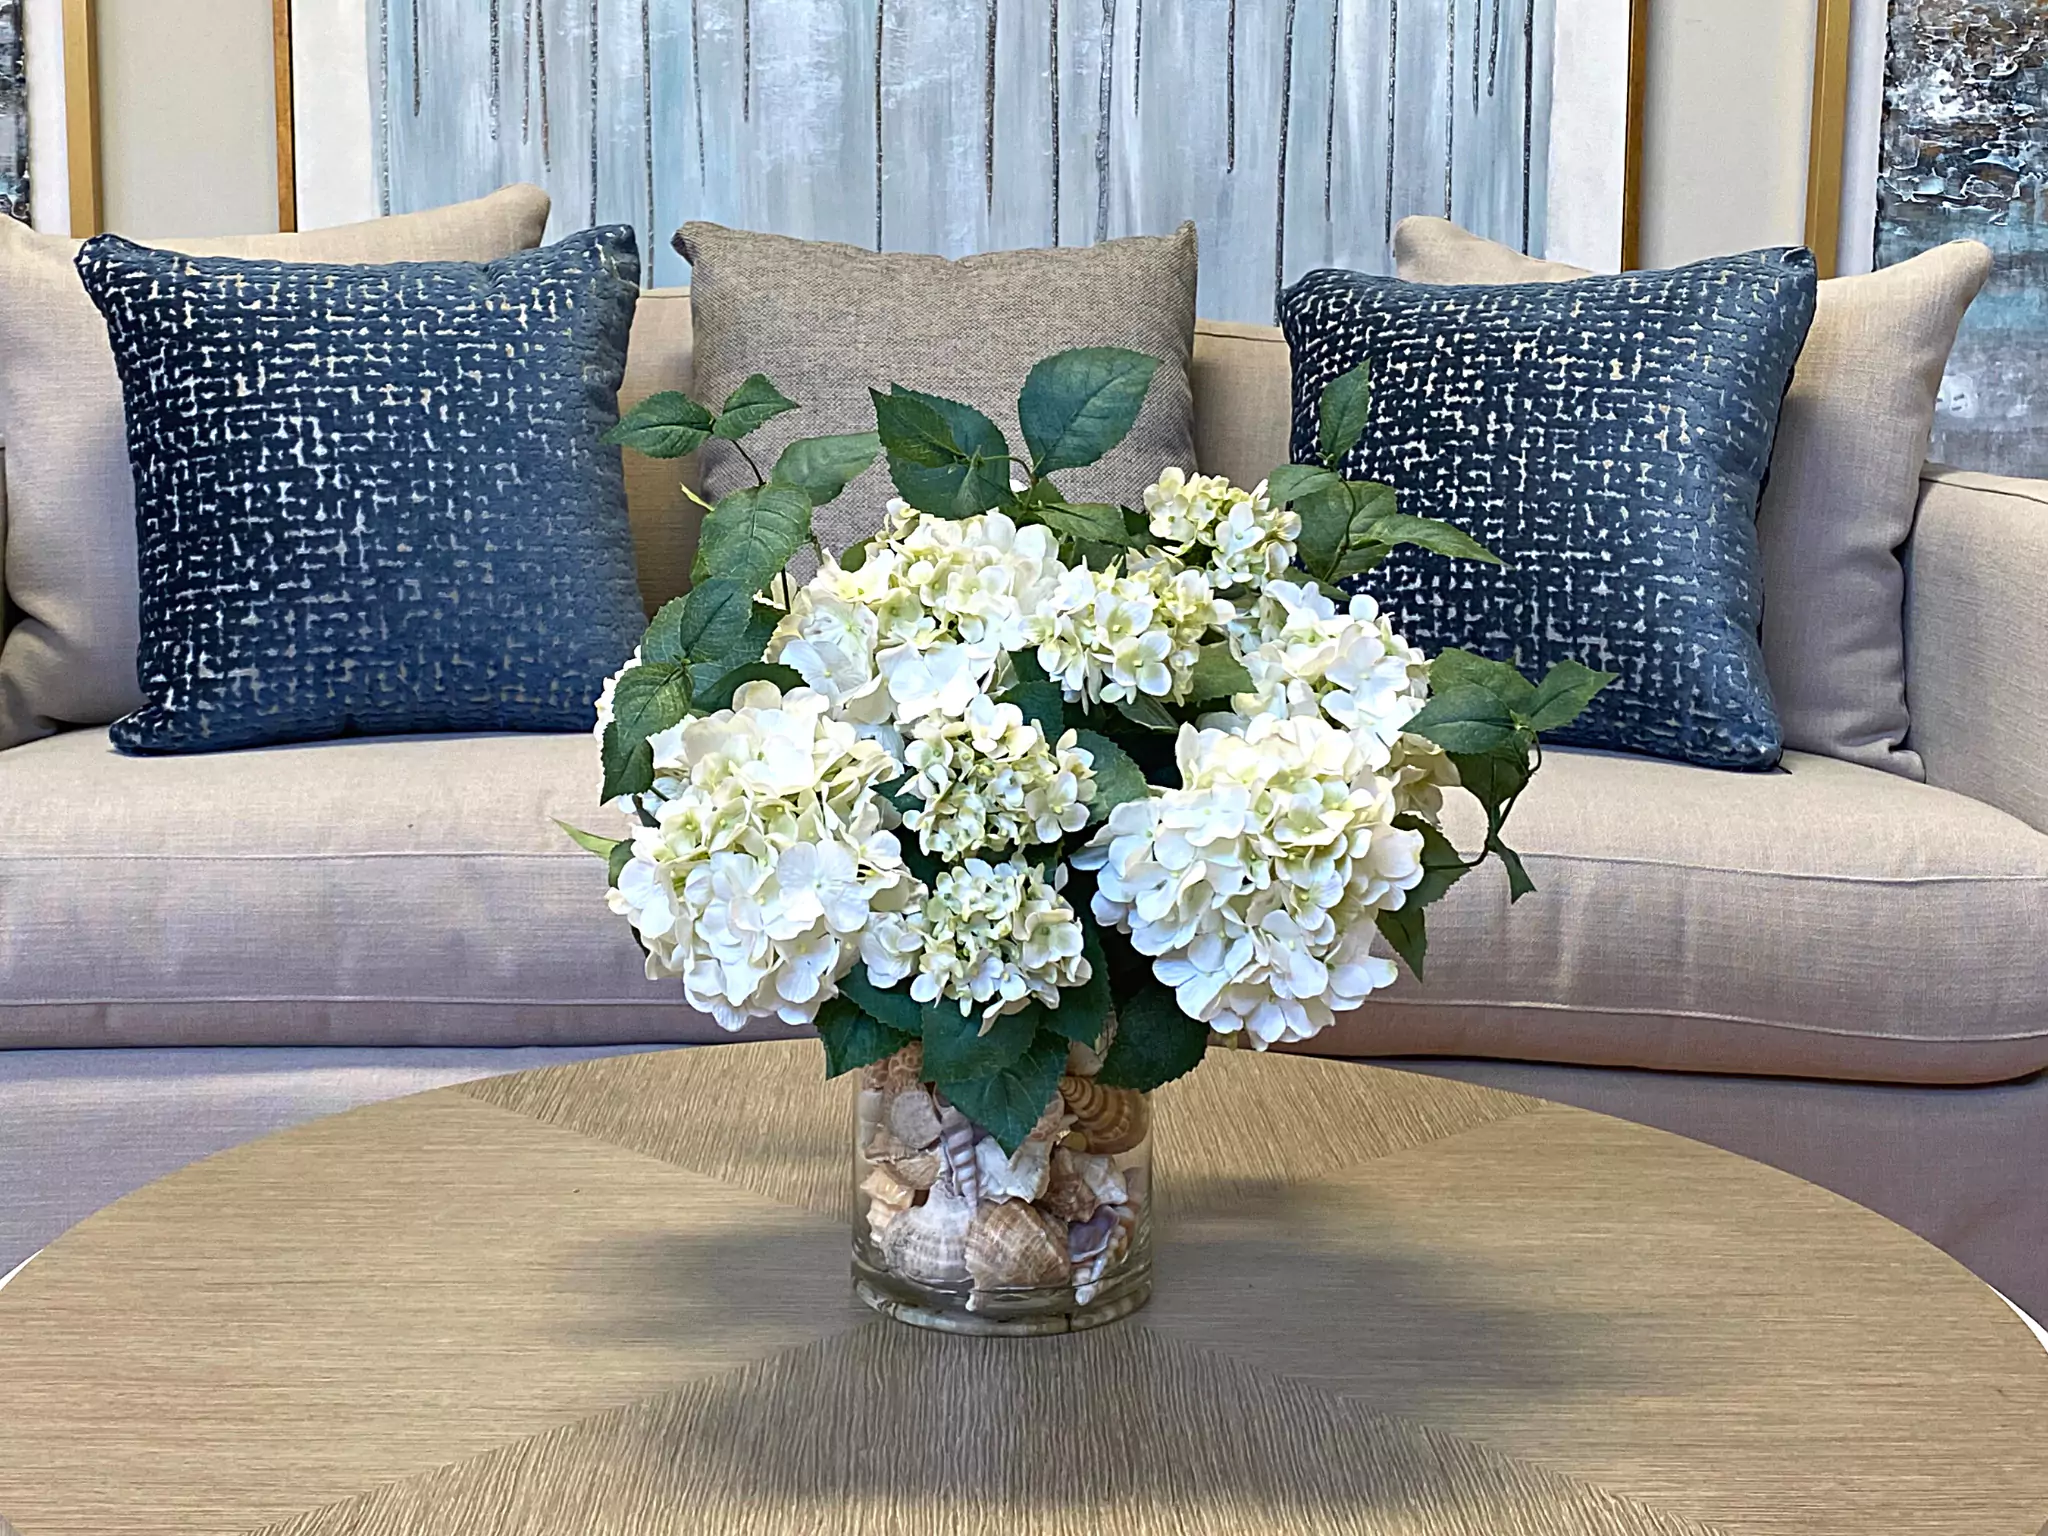 Hydrangea Floral Arrangement in a Clear Glass Vase with Seashells